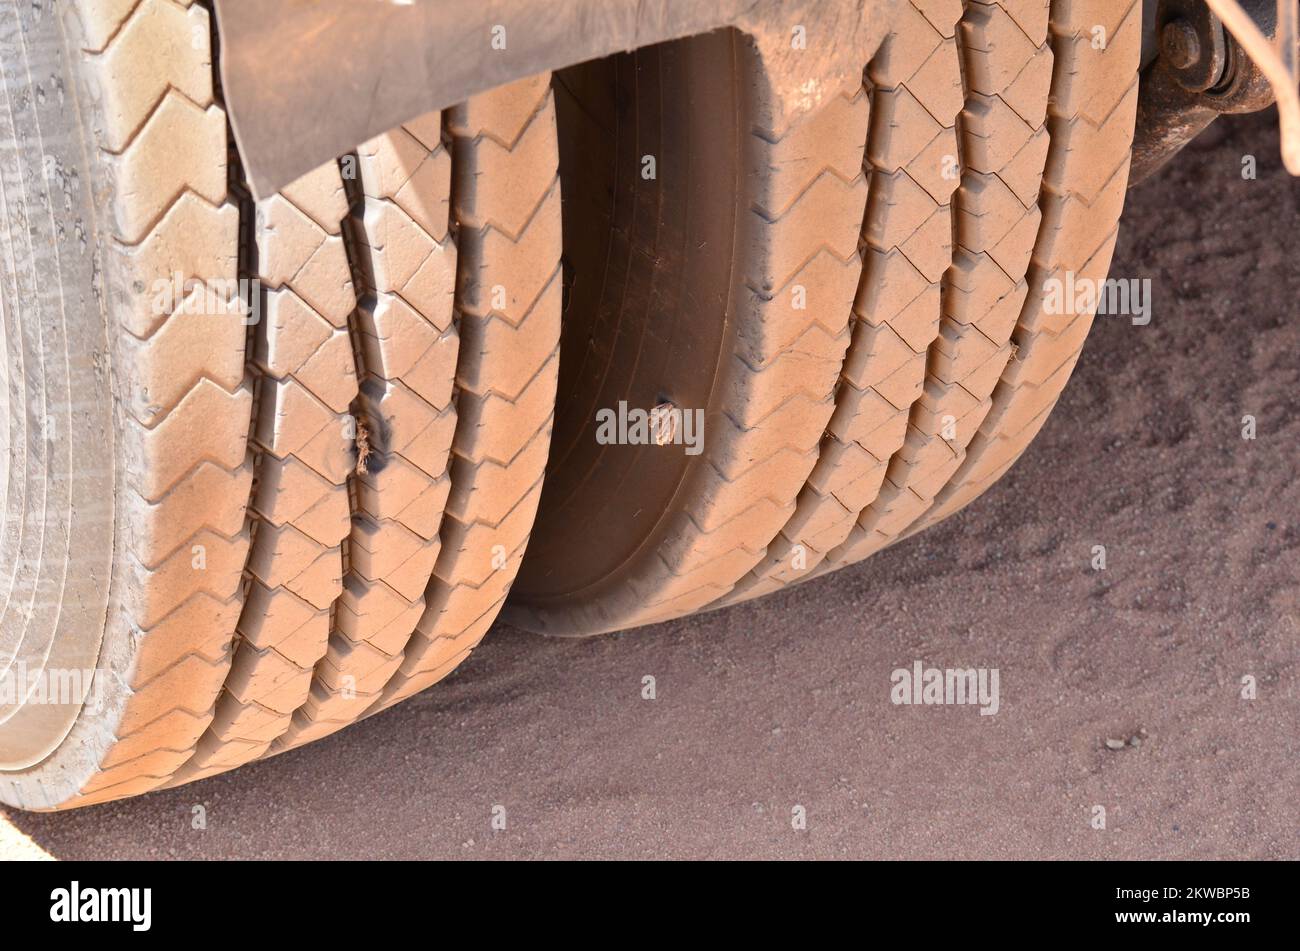 Old Dusty Truck Tire With punkture Repair Hole outside Stock Photo